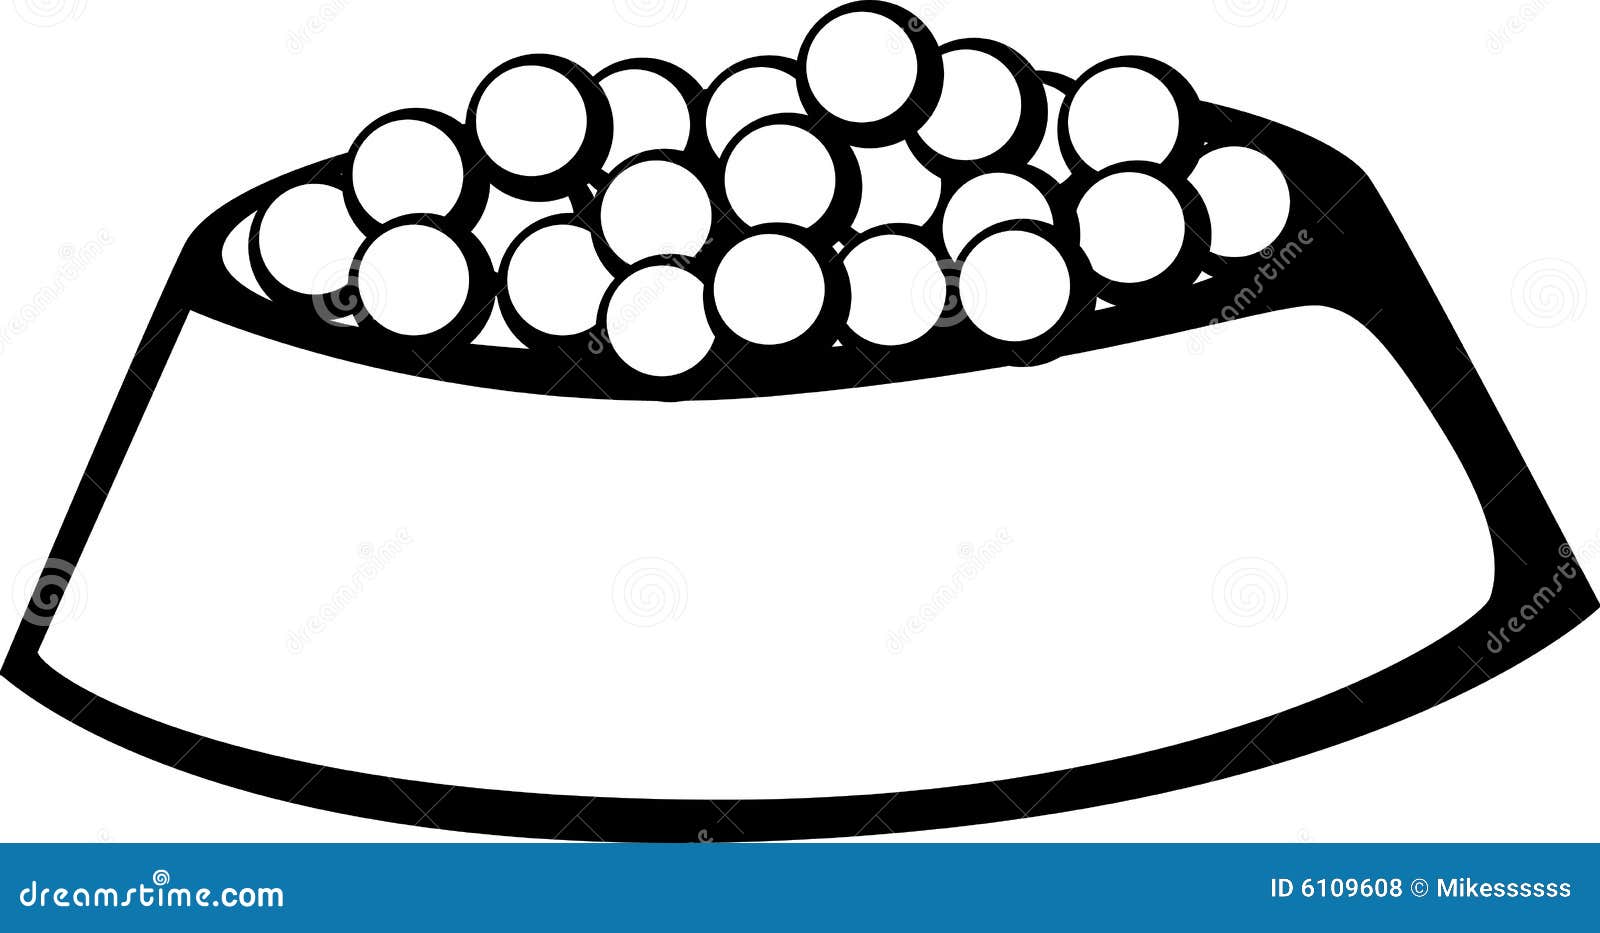 cooking bowl clipart - photo #32